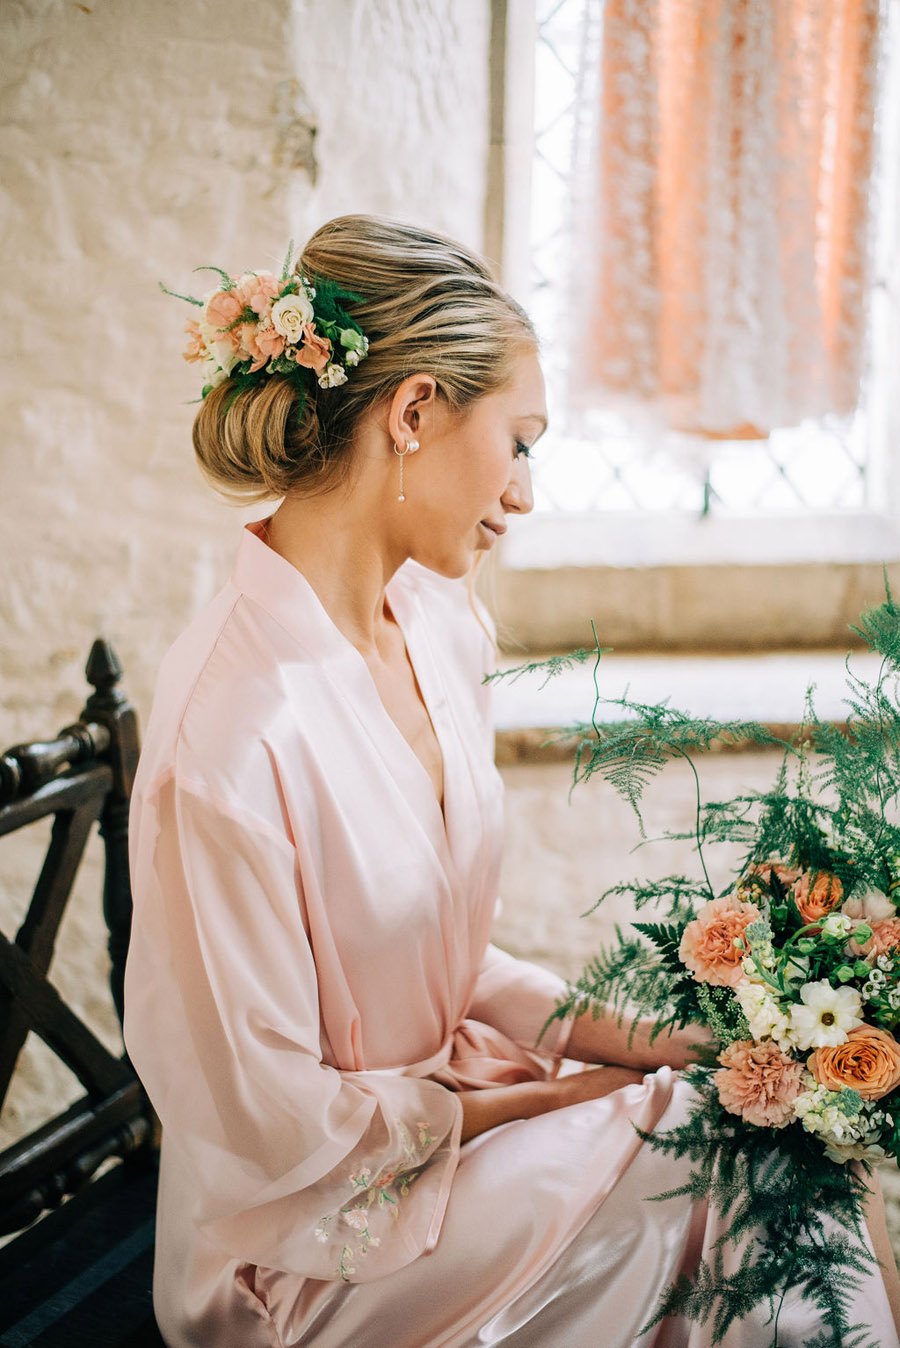 coral and neutral colour palette for a stunning wedding look with Corky and Prince, image credit Rachel Jane Photography (16)